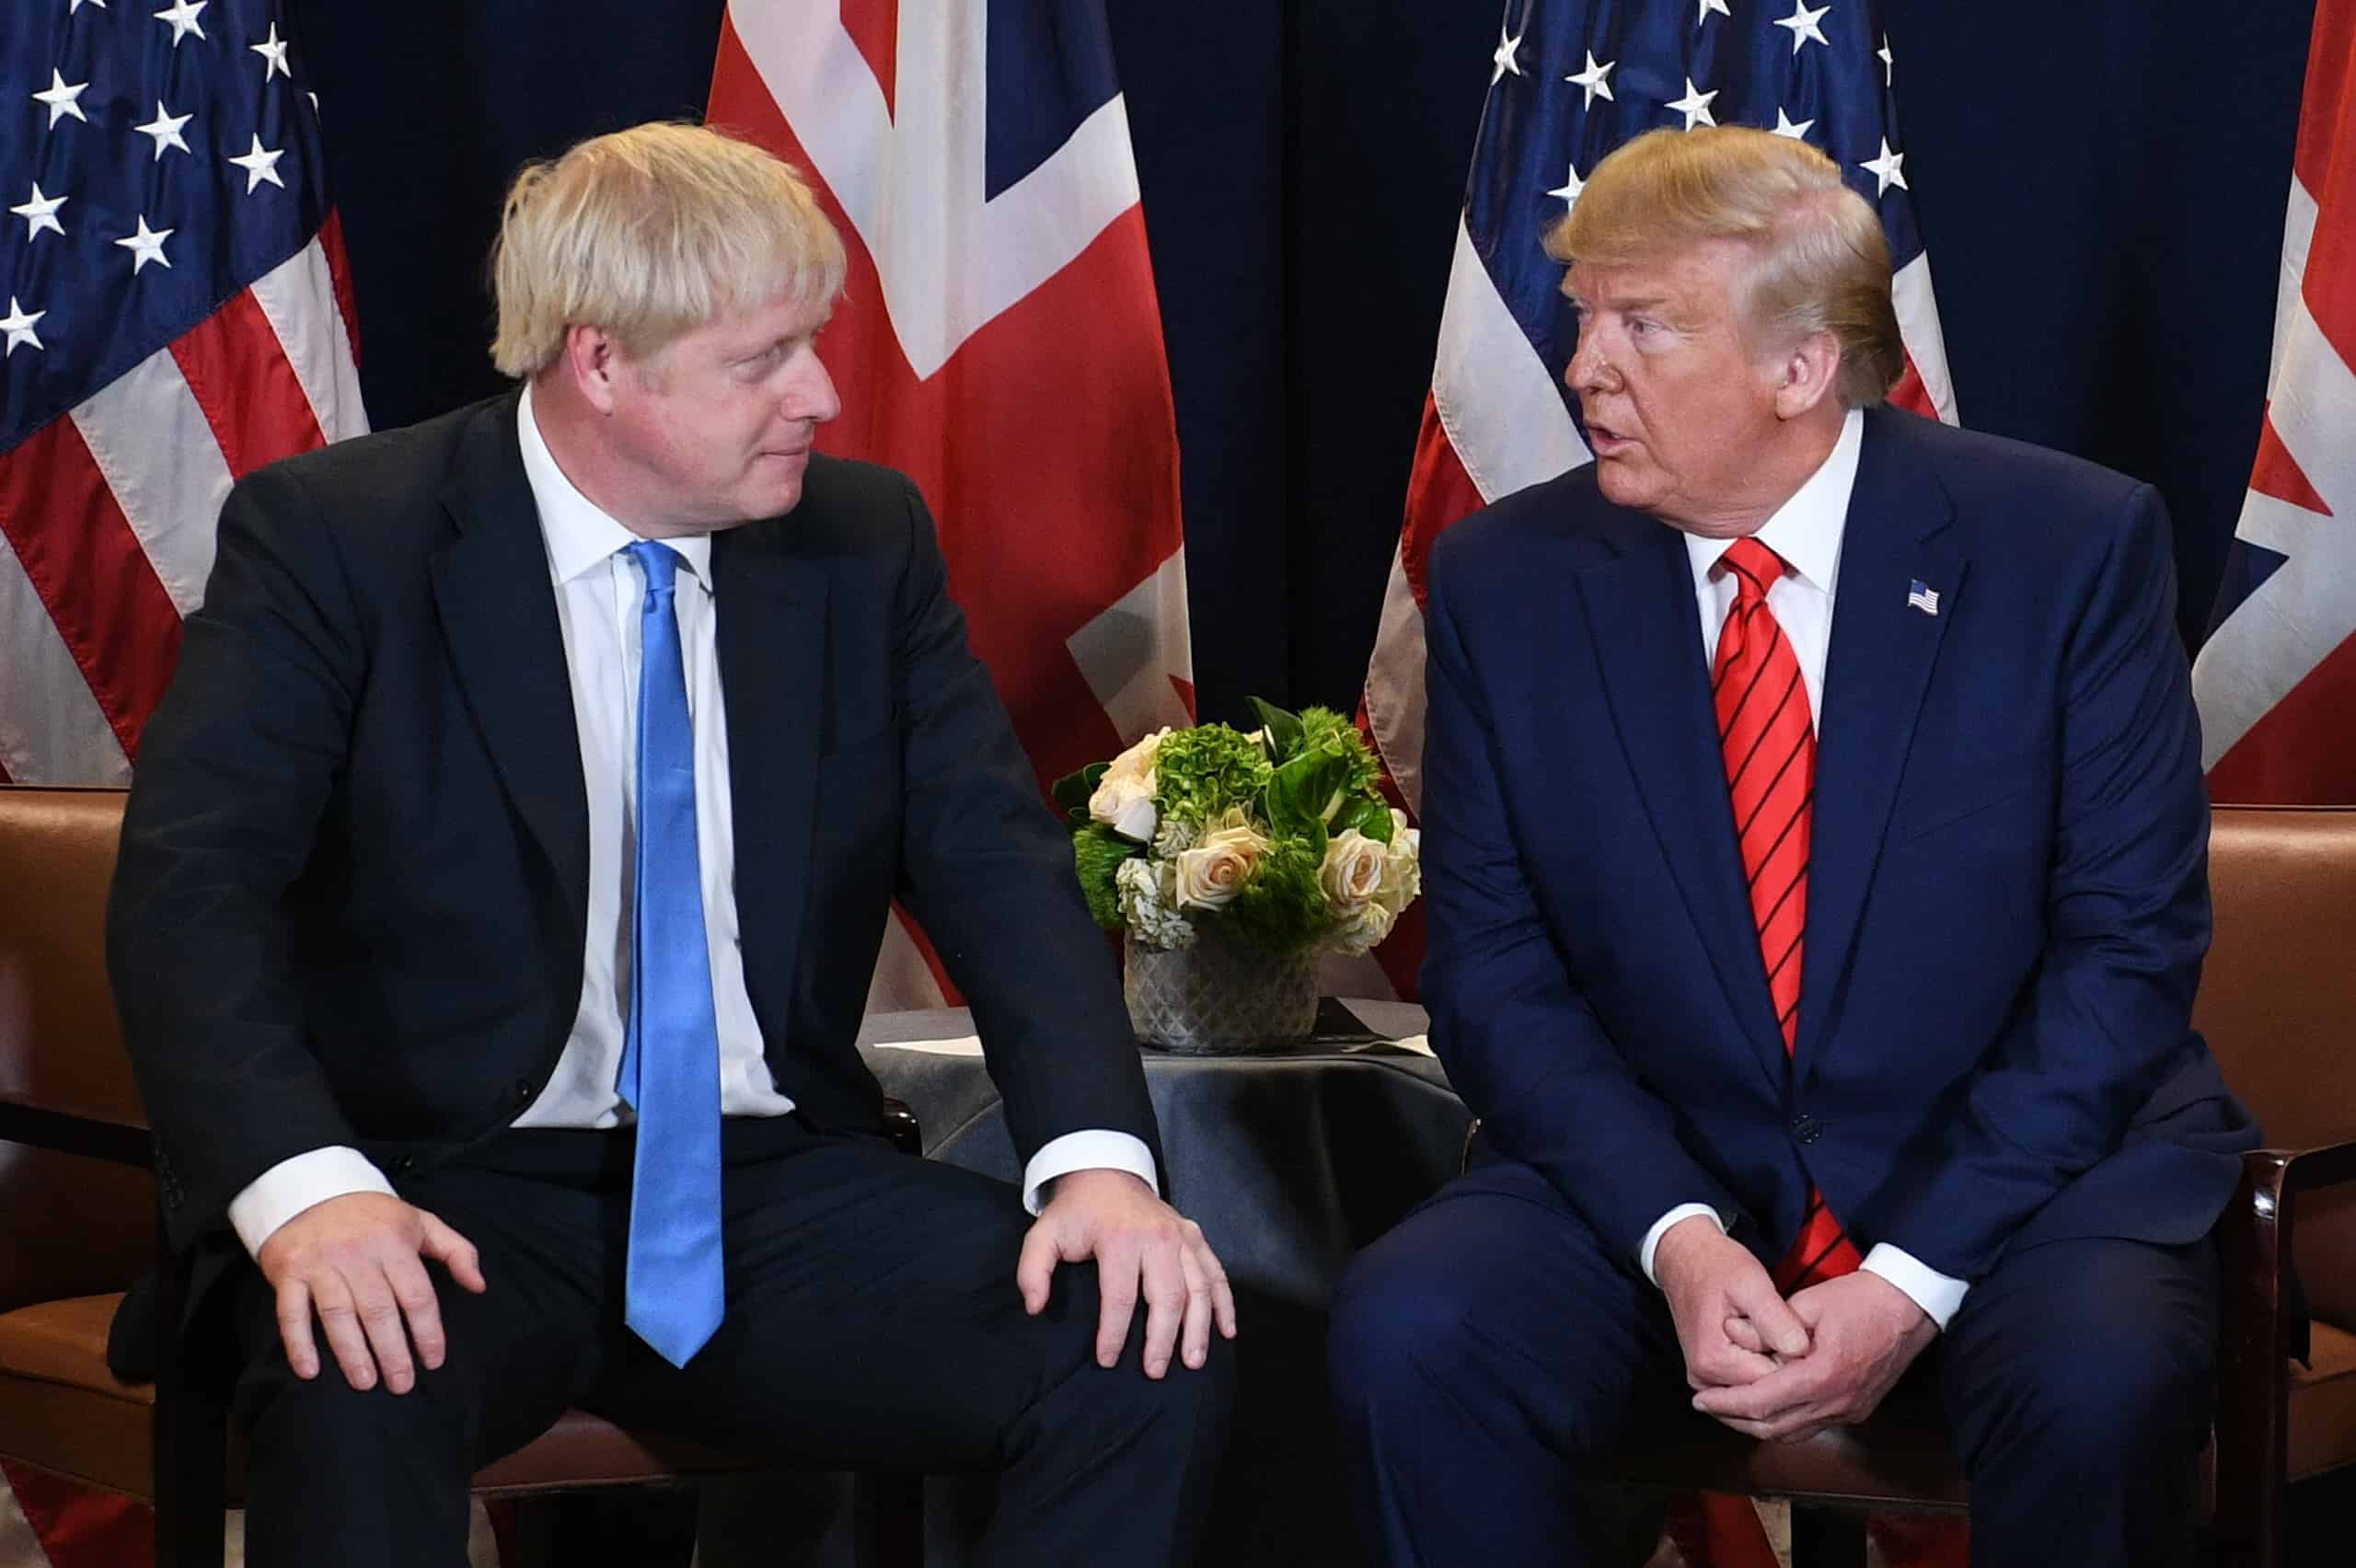 Boris Johnson told Donald Trump to keep discussions about privatising the NHS just between them